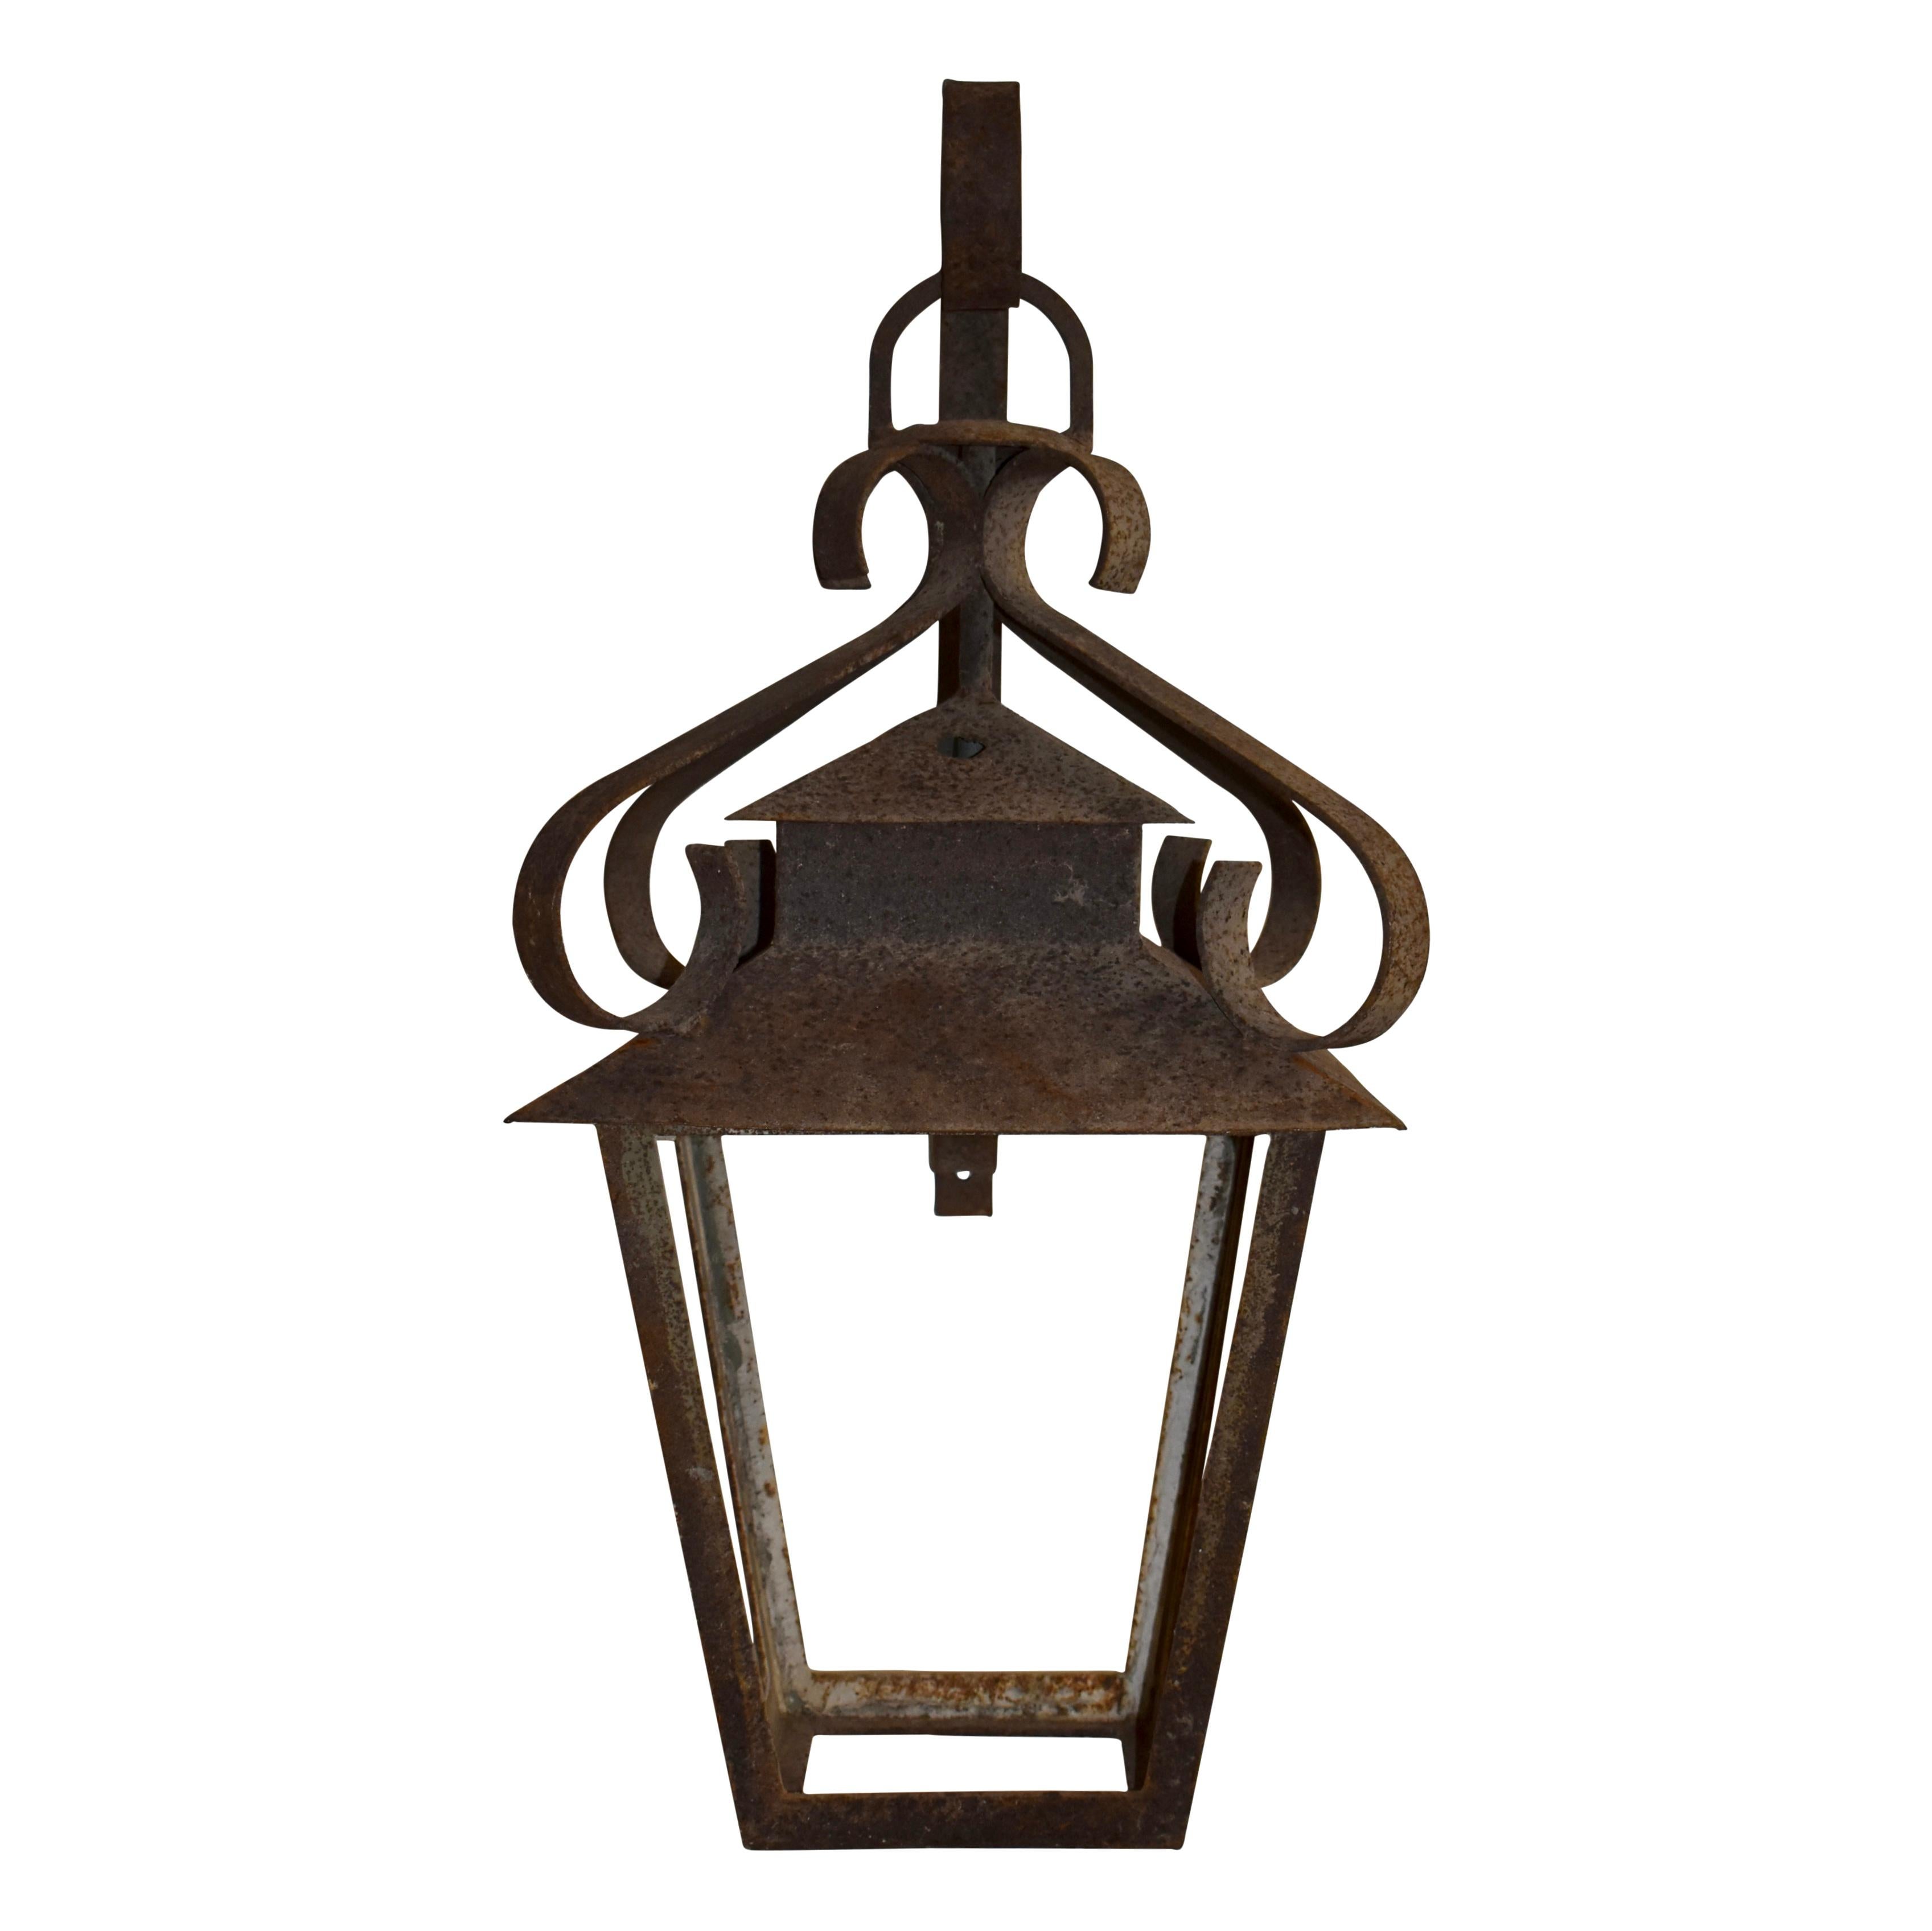 European Wrought Iron Lantern Suspended from Wall Bracket, circa 1900 For Sale